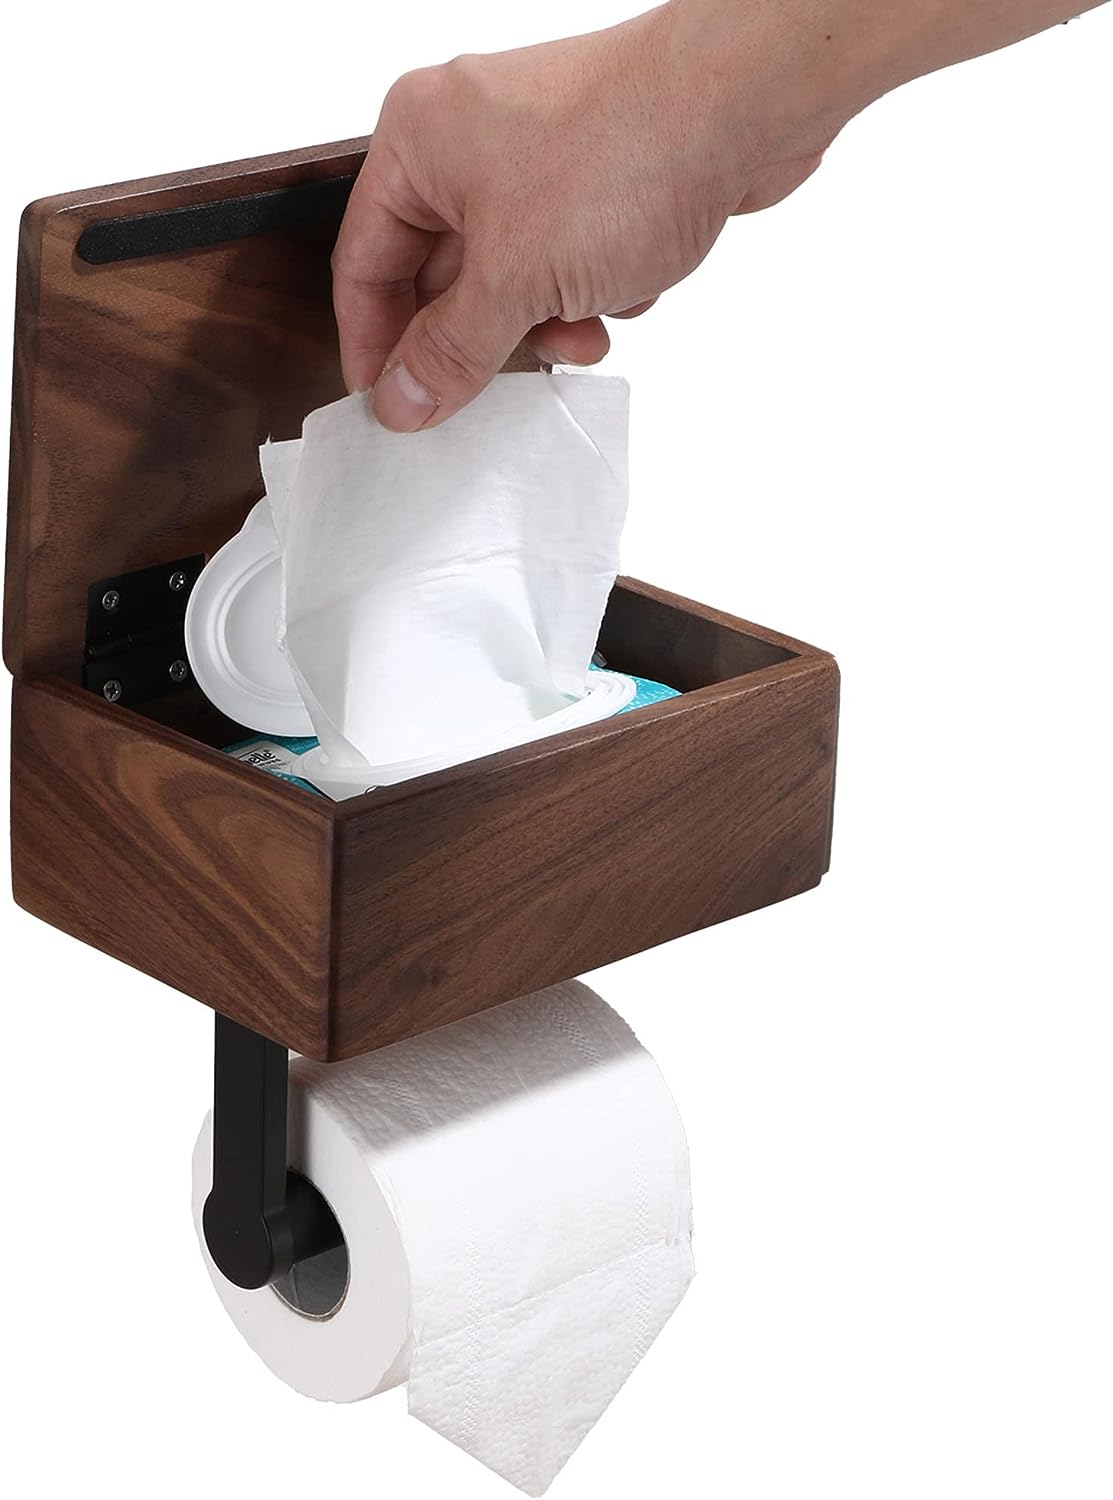 Toilet Paper Holder, Toilet Paper Roll Holder Wall Mounted, Fits